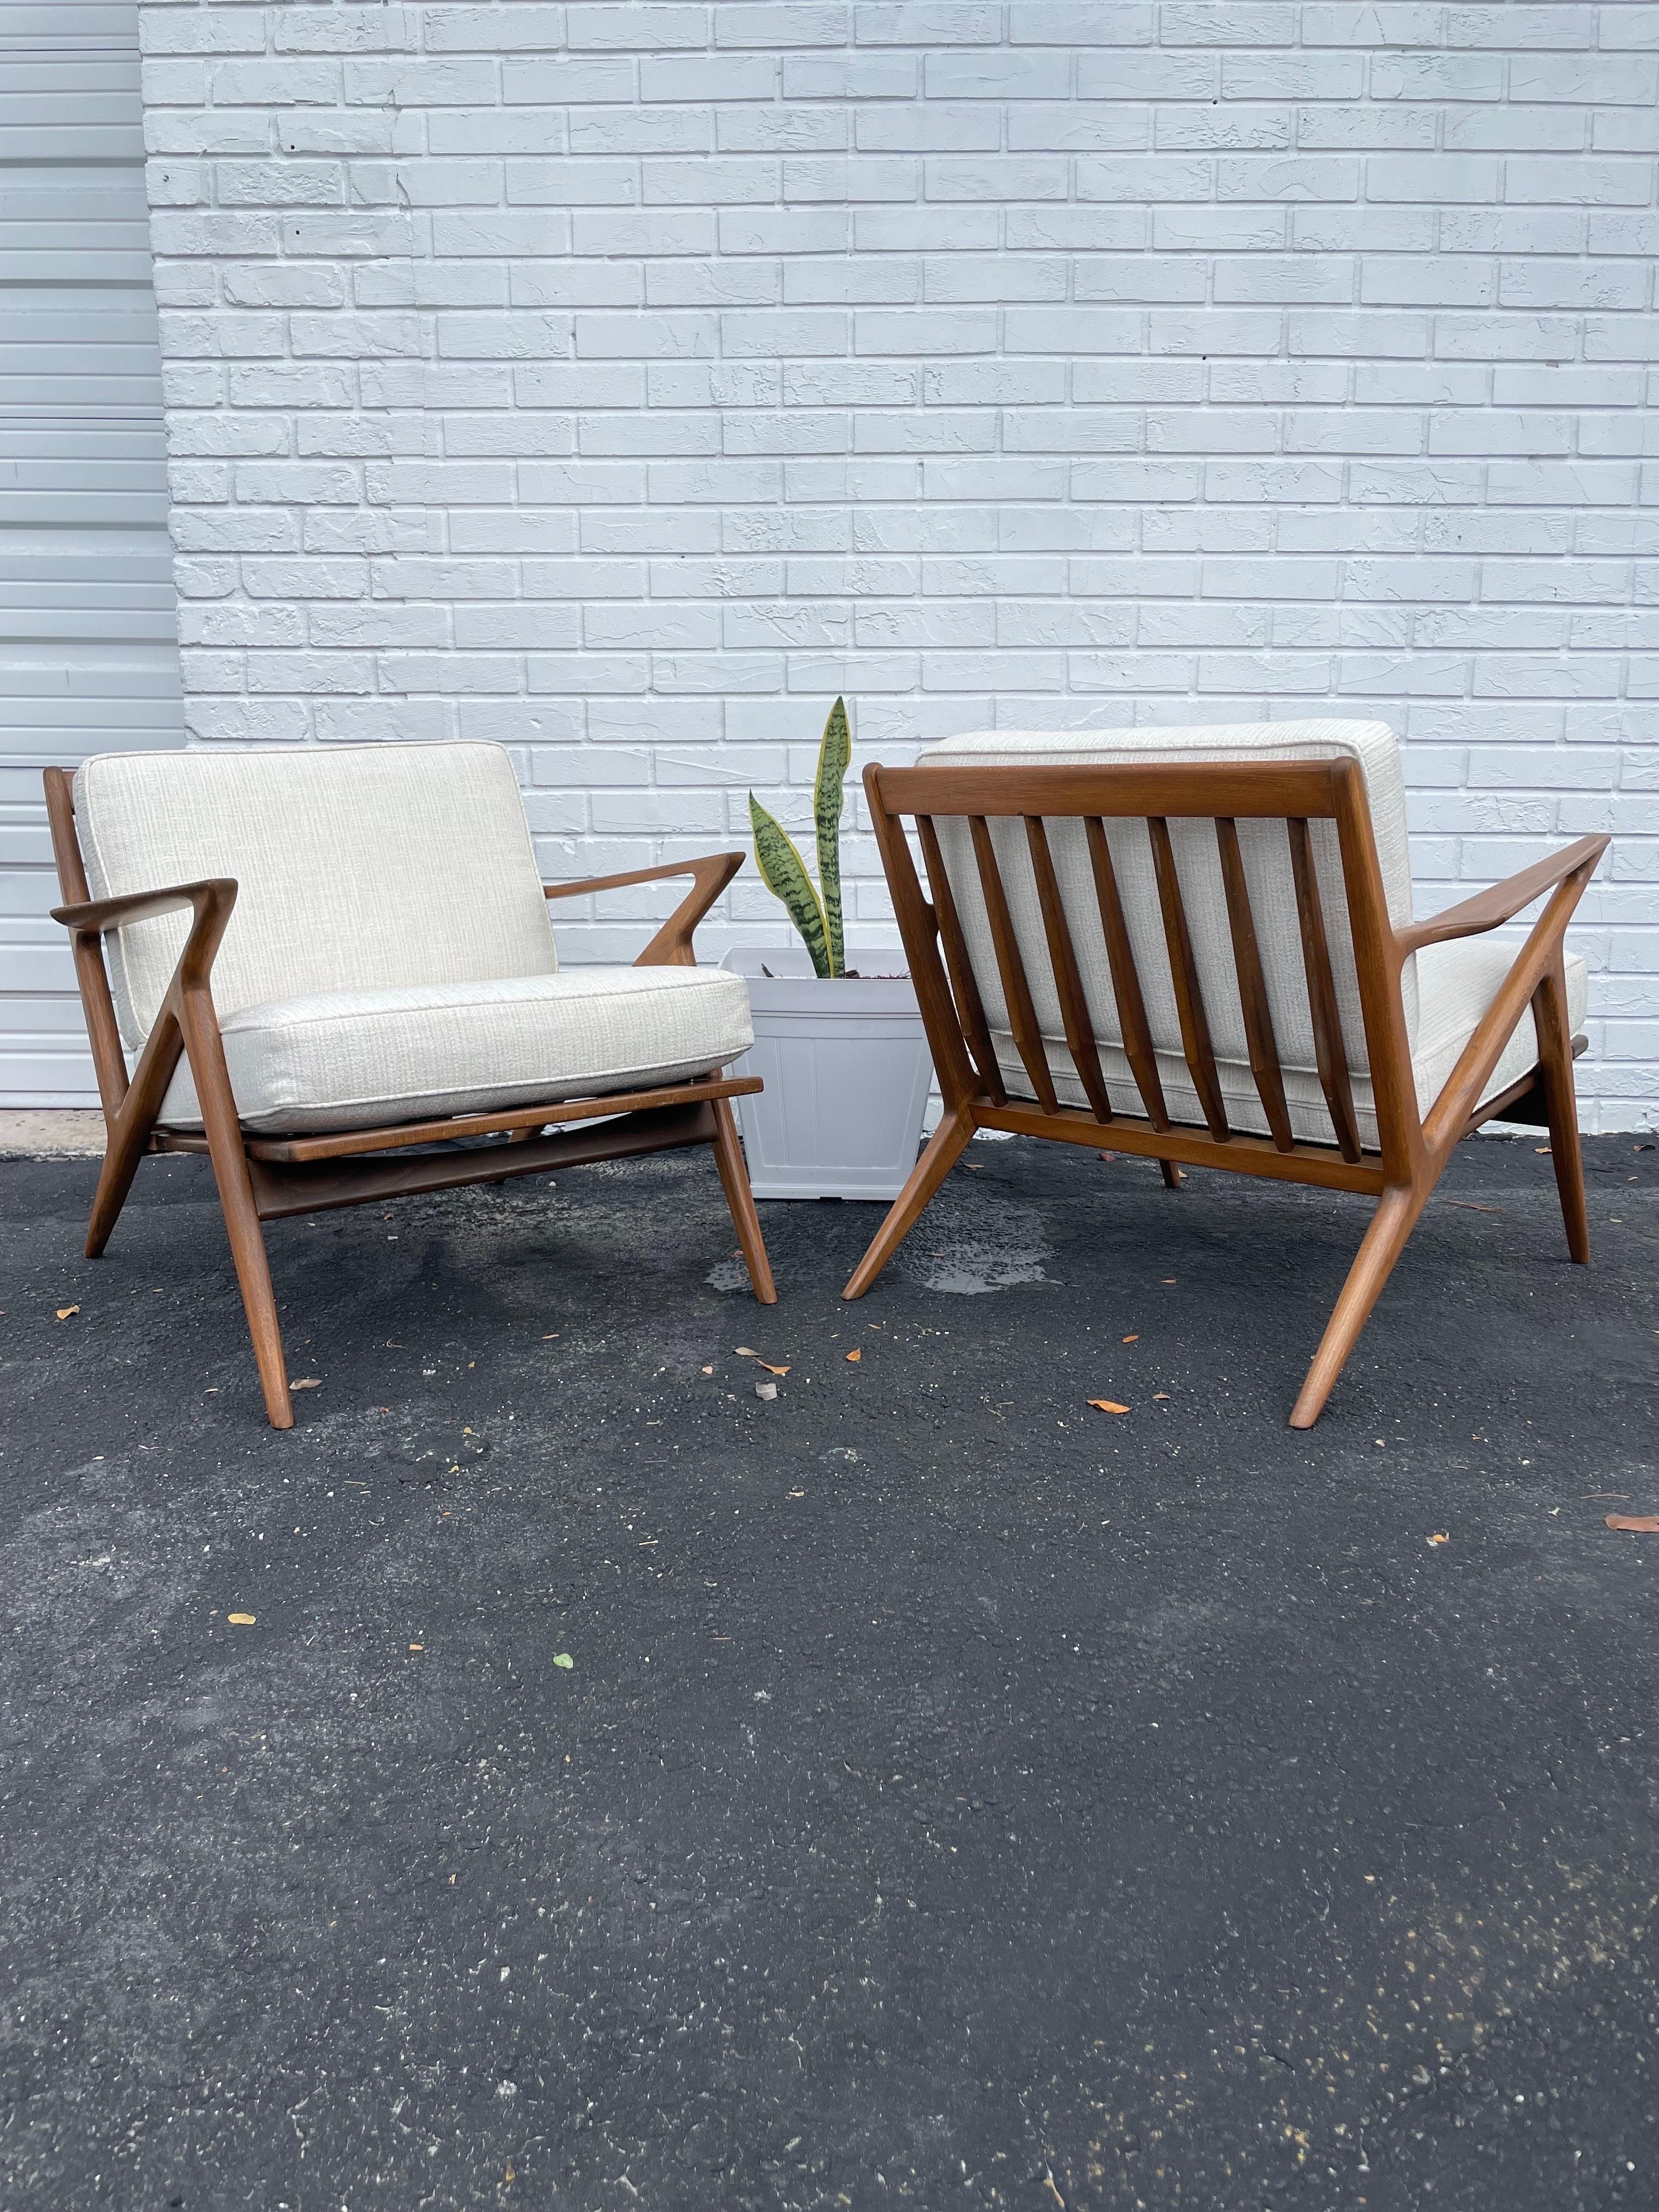 Pair of “Z” Chairs by Poul Jensen for Selig. New cushions. Walnut frame.